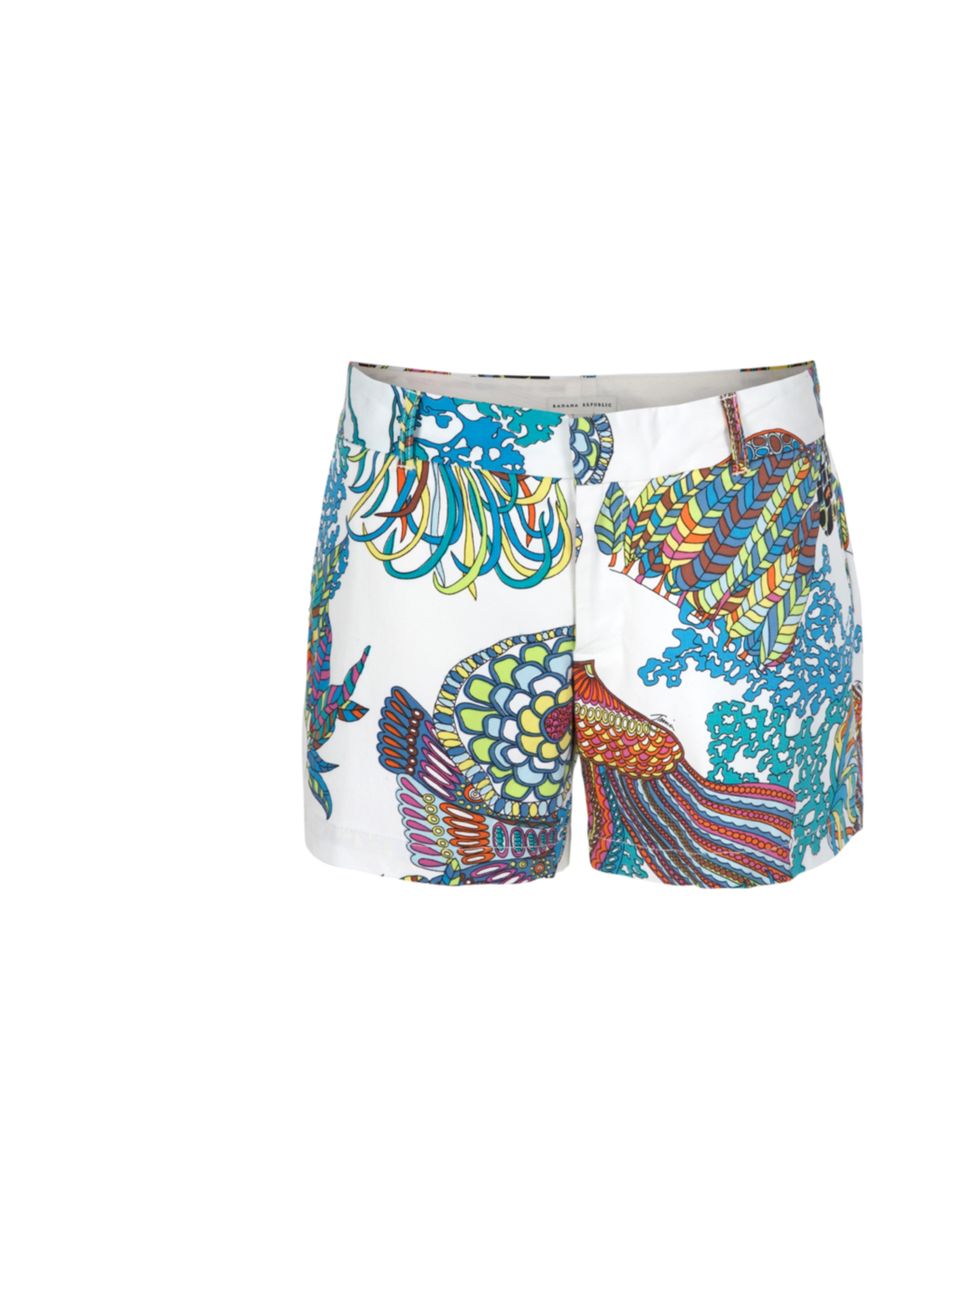 <p>Inject some tropical spirit into your wardrobe courtesy of Tina Turks capsule collection for Banana Republic Trina Turk for Banana Republic printed city shorts, £35, at <a href="http://bananarepublic.gap.eu/">Banana Republic </a></p>